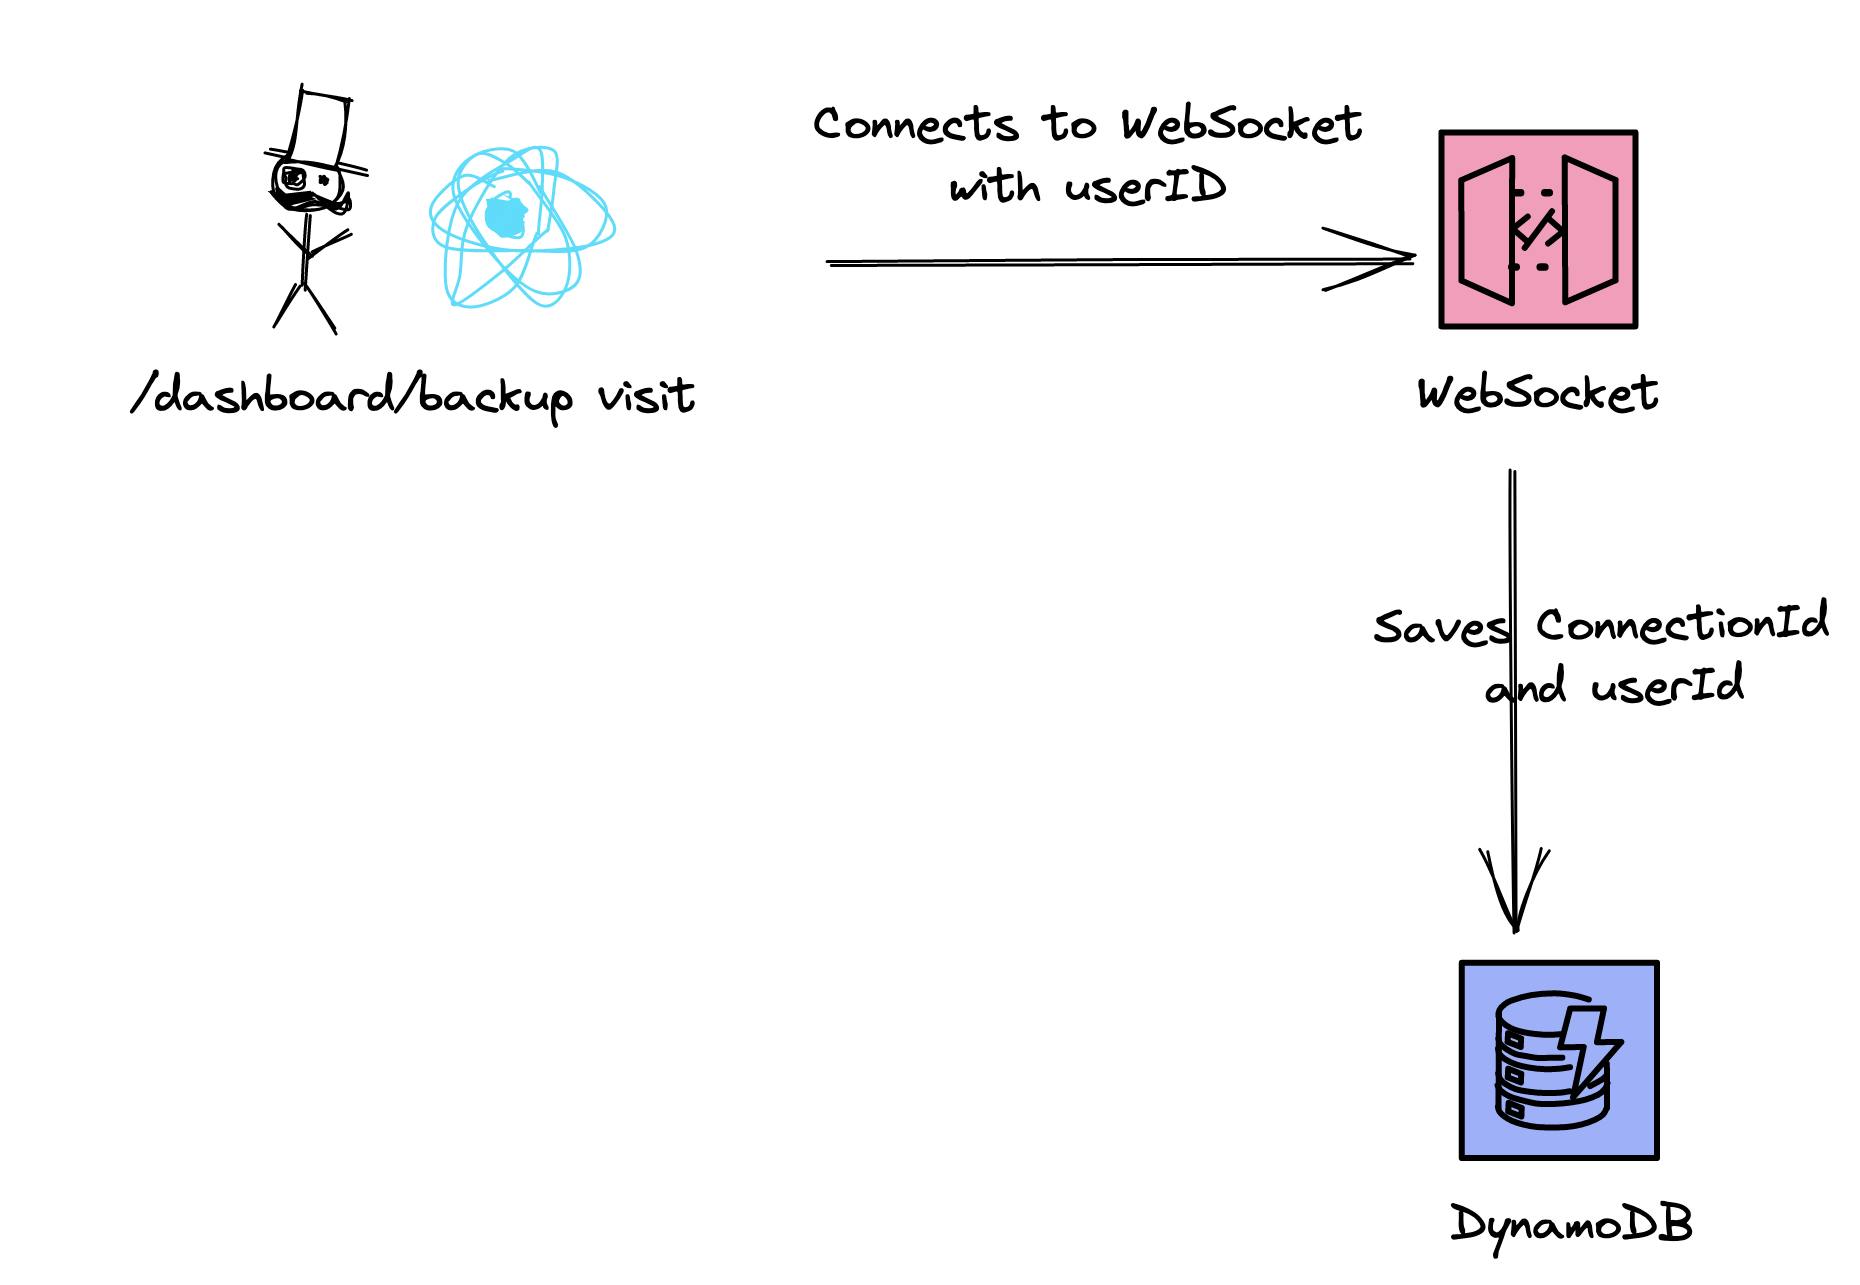 Client connects to WebSocket